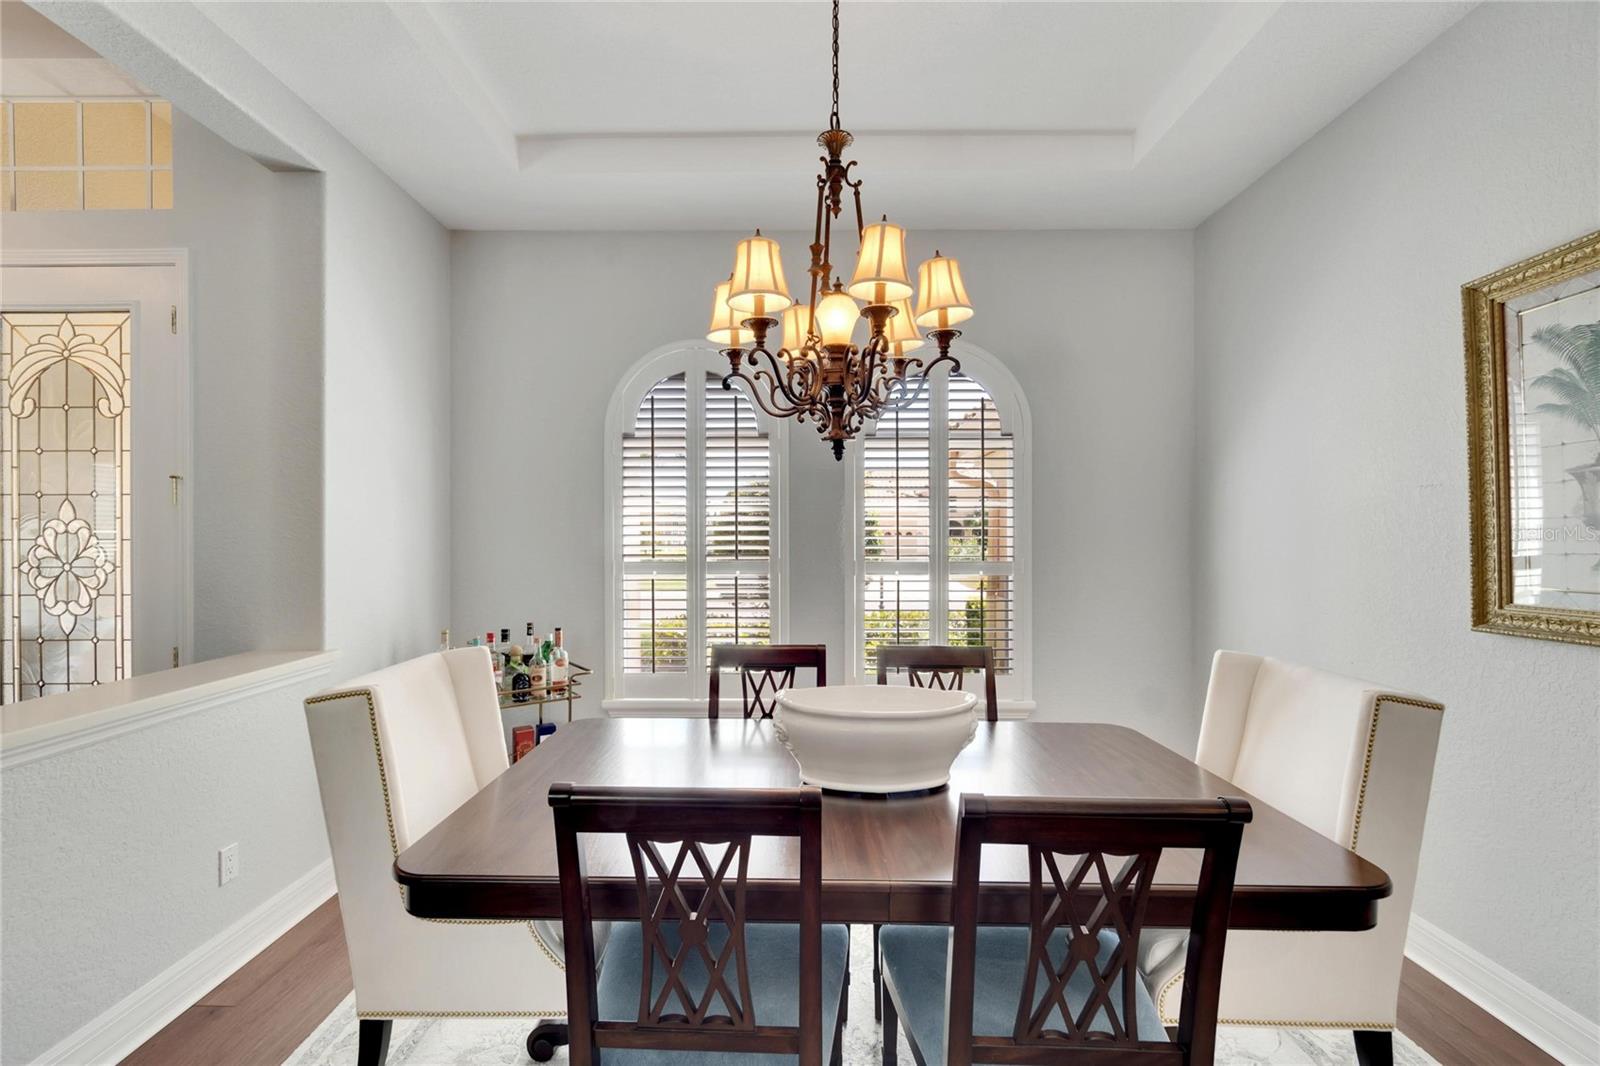 Open Concept Design for flow - yet this Dining Room feels nestled in this space and looks elegant with plantation shutters and trey ceiling.